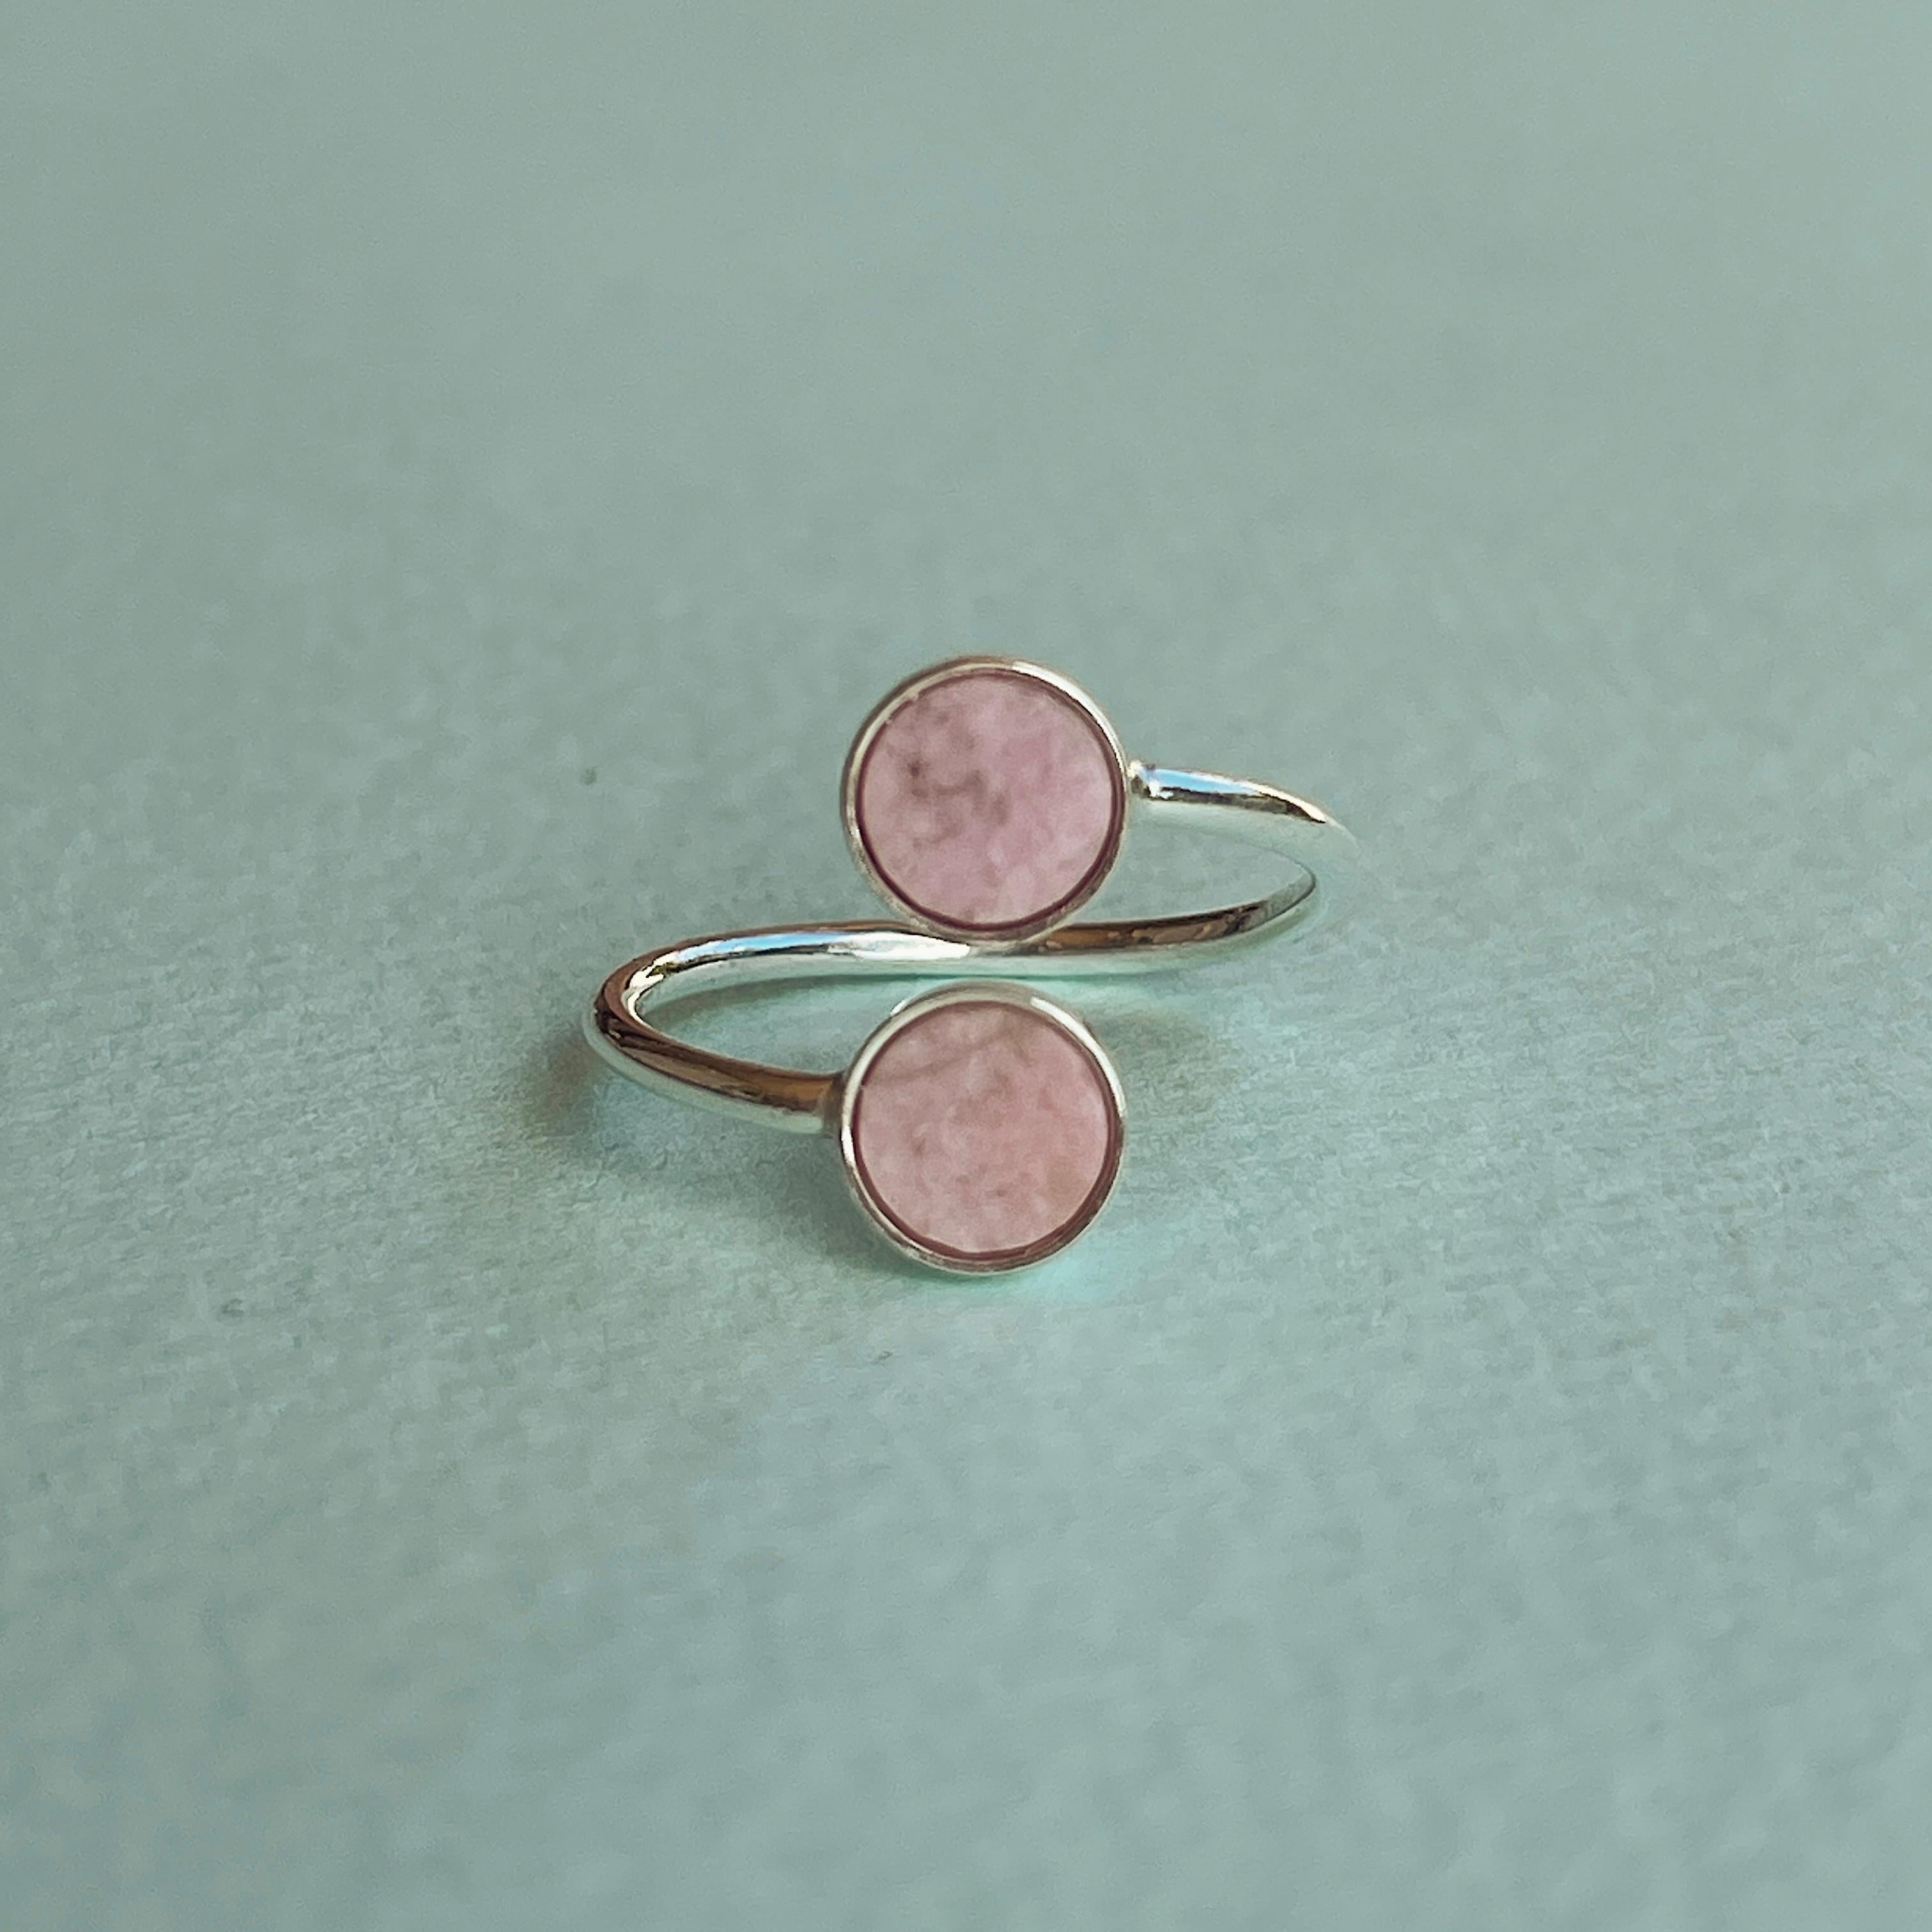 Elevate your style with our sterling silver ring featuring stunning rodingite stones. This adjustable ring offers both timeless elegance and personalized comfort for a truly unique accessory.
The ring is made of sterling silver. 
The diameter of the